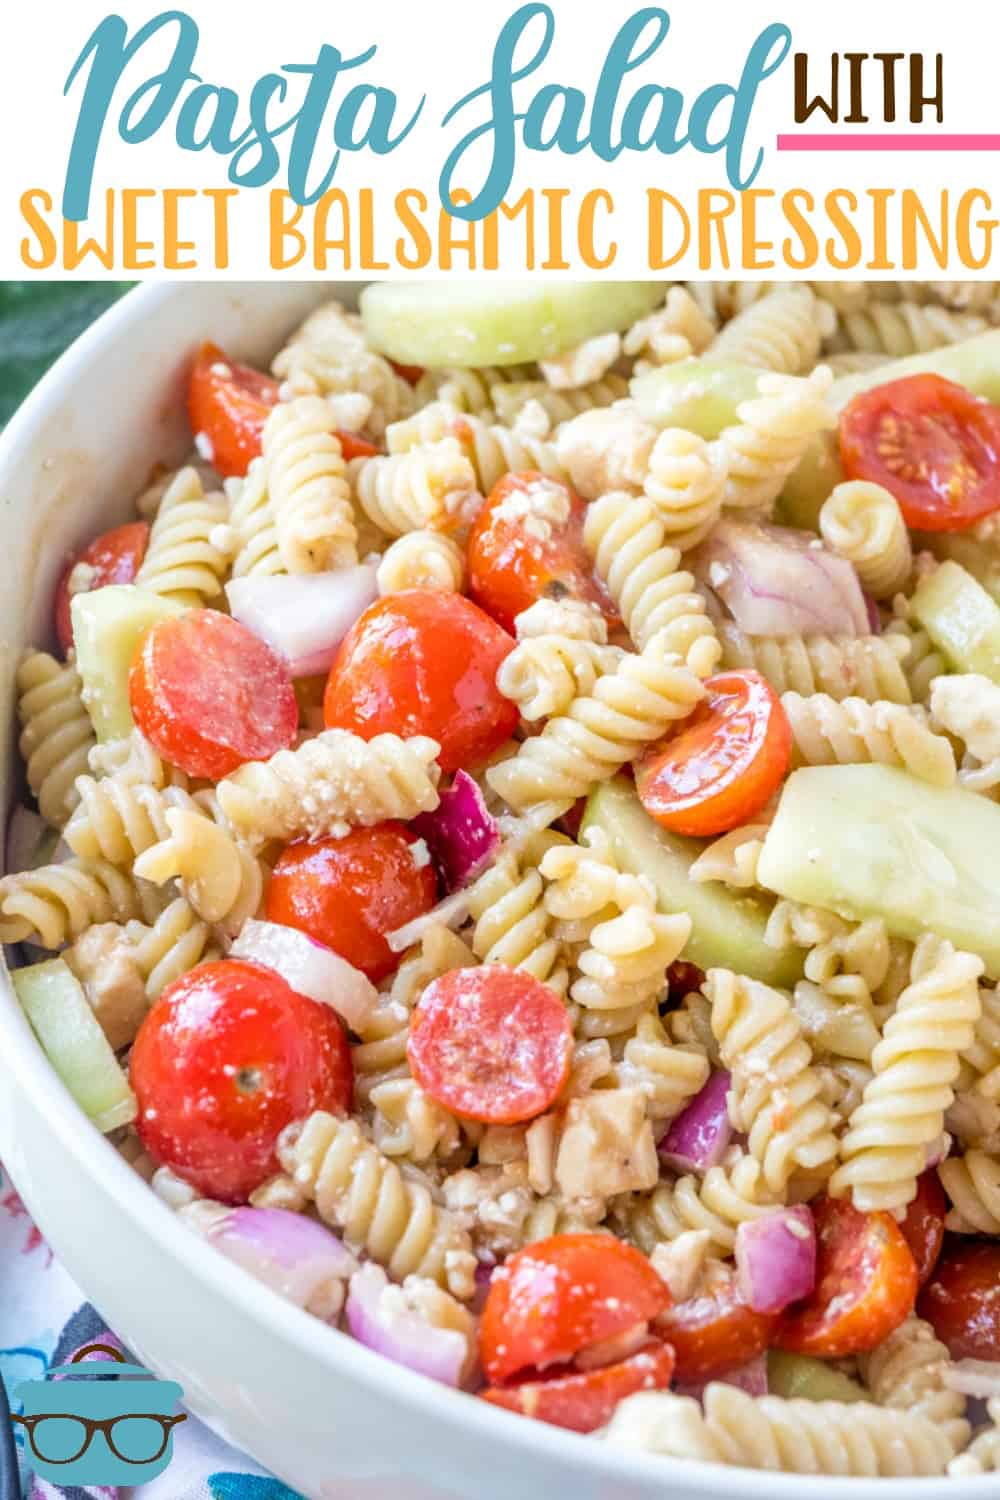 Pasta Salad with Sweet Balsamic Dressing recipe at The Country Cook shown in a large with bowl.